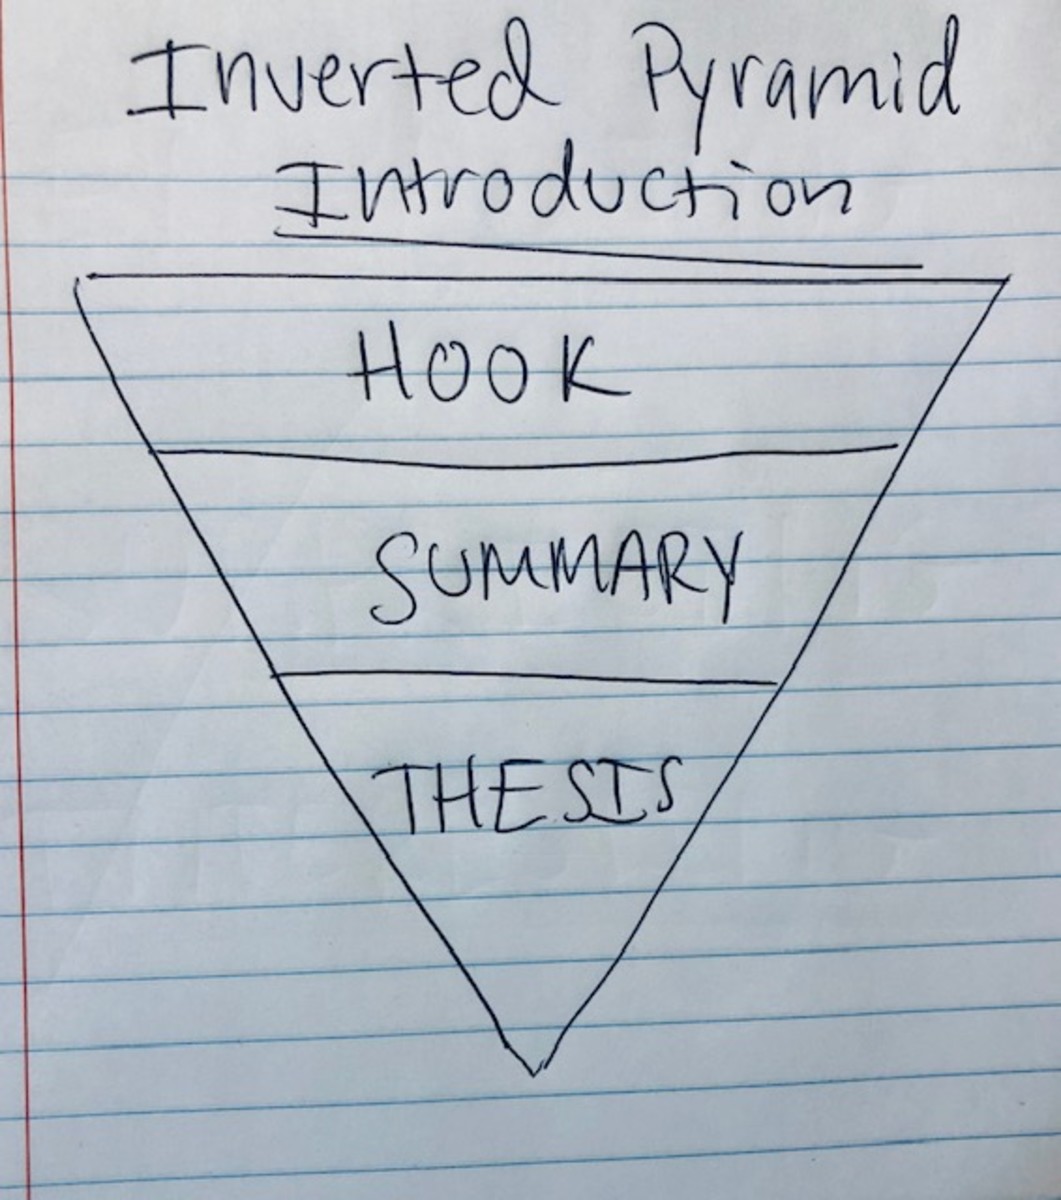 Your introduction paragraph should follow the inverted pyramid format, moving from general to specific information. The hook is the first part of the introduction. 